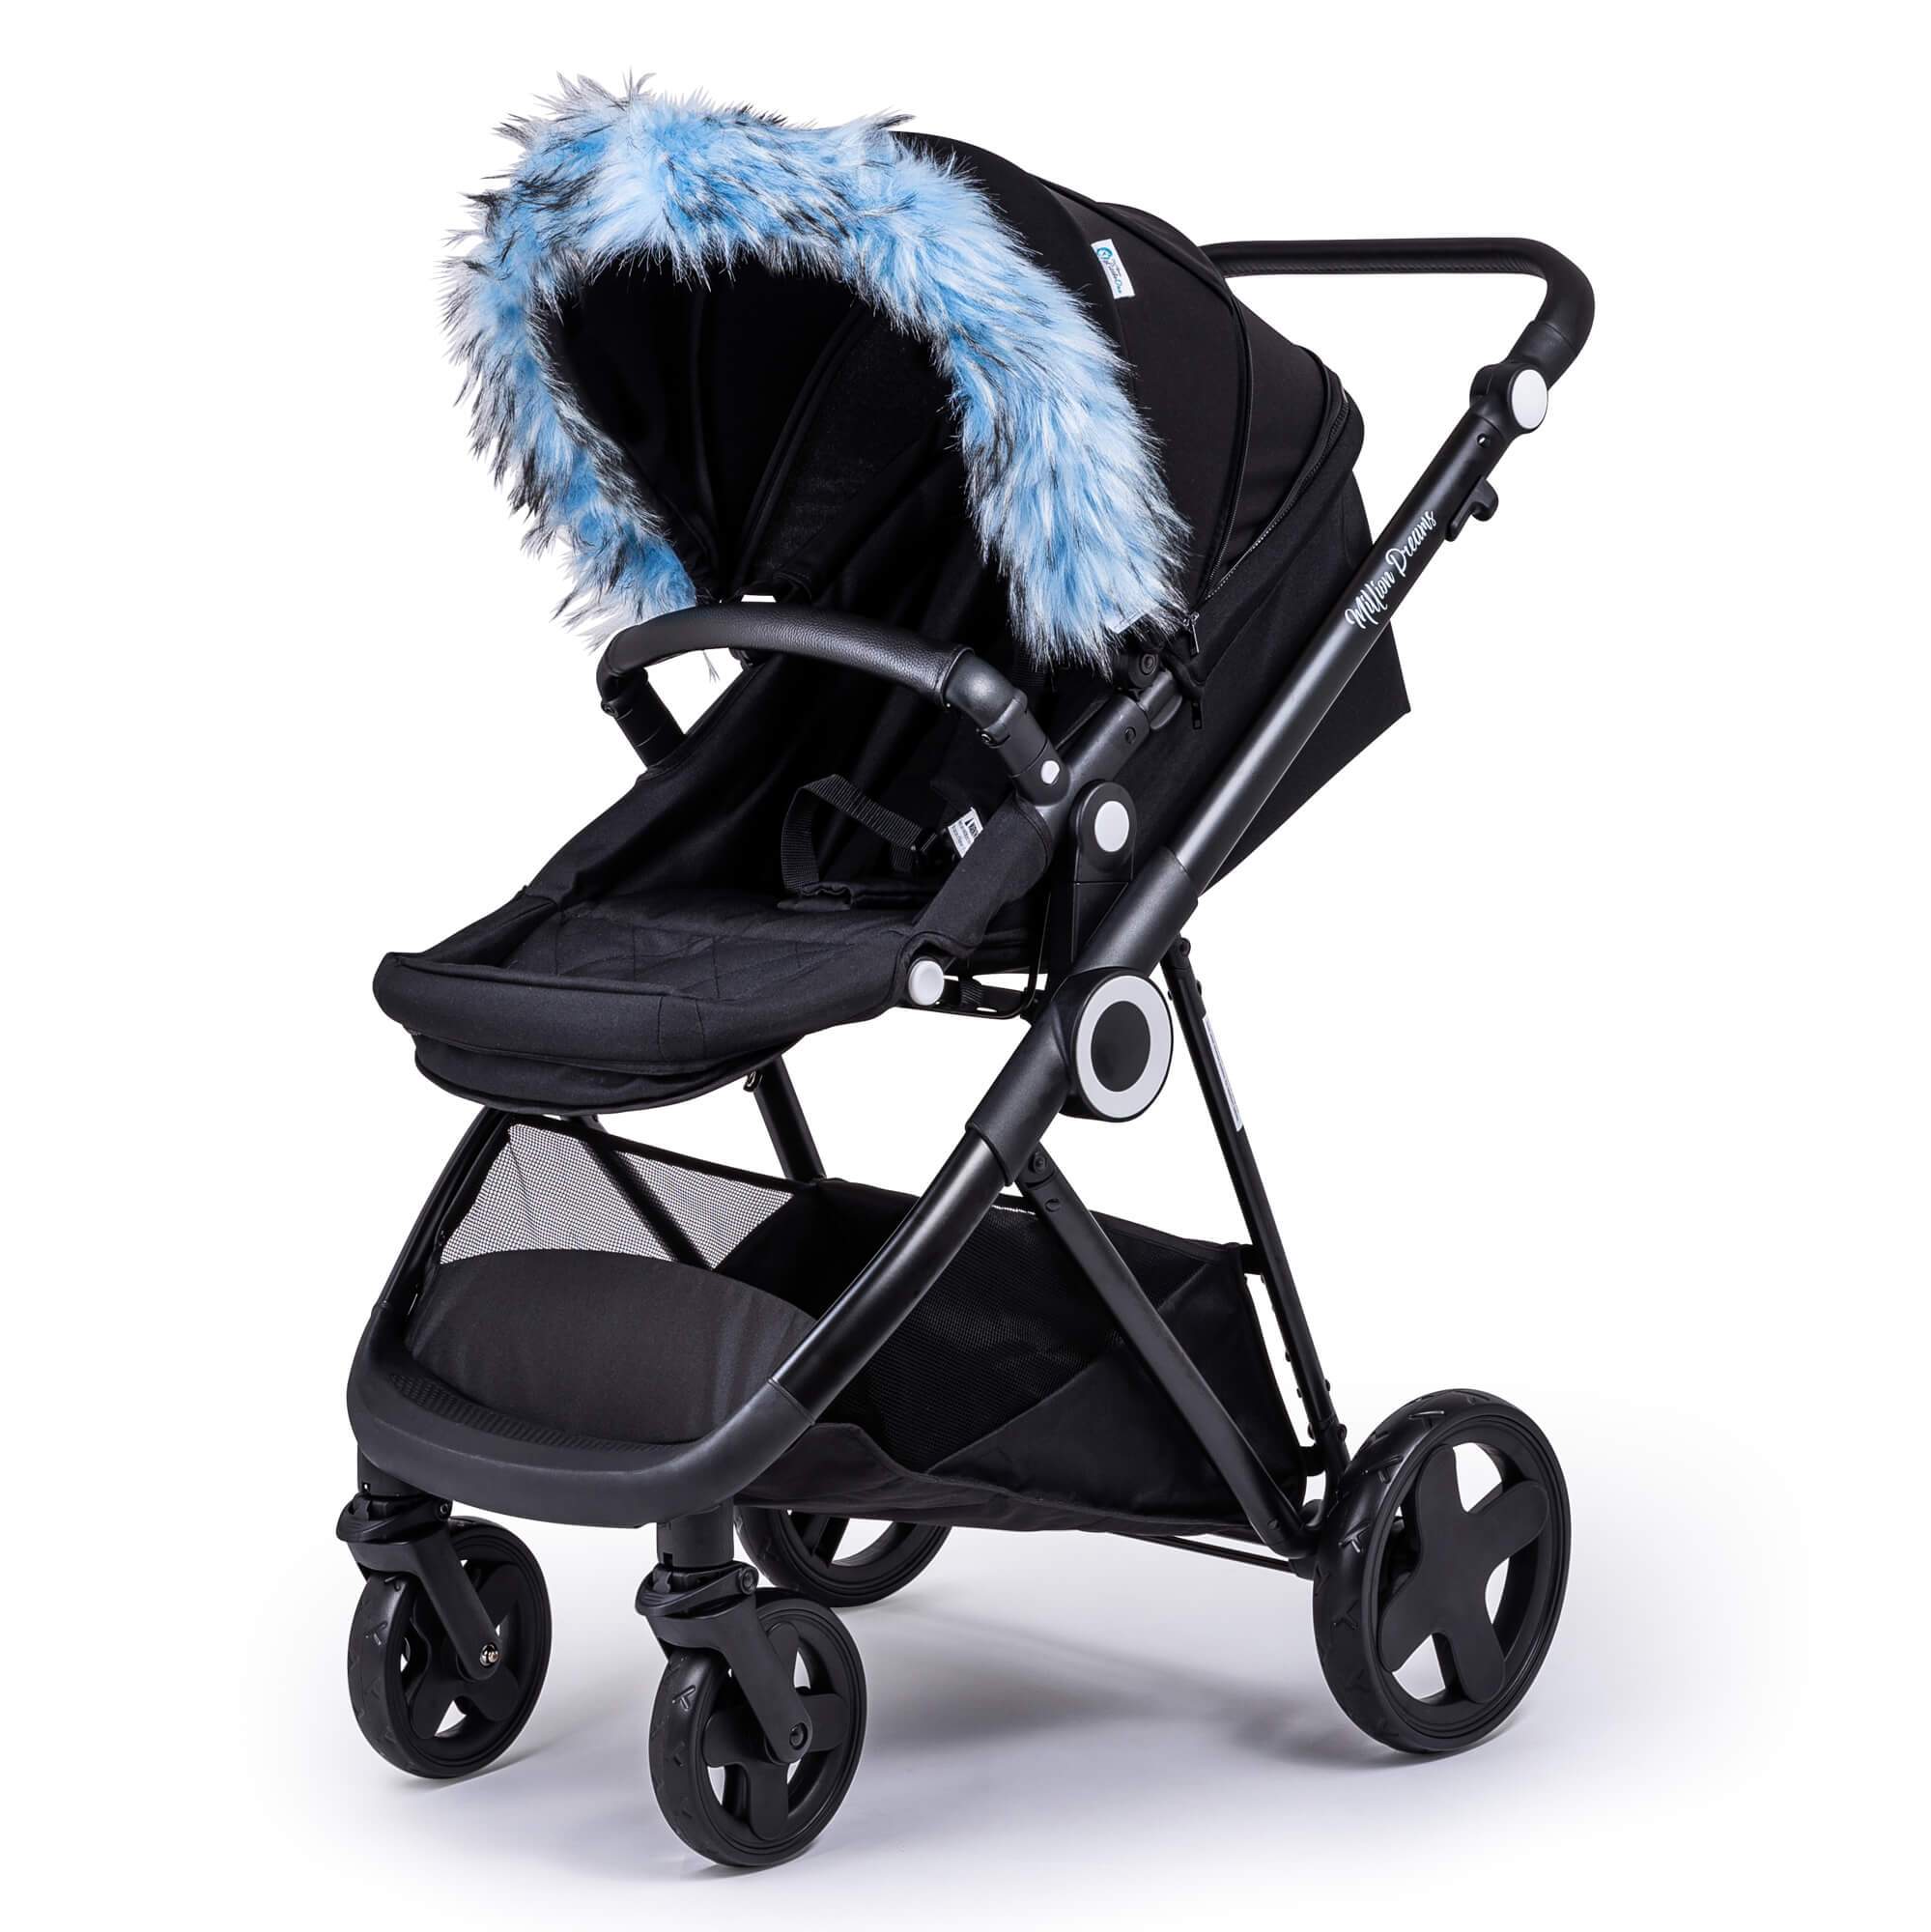 Pram Fur Hood Trim Attachment For Pushchair Compatible with My Child - Light Blue / Fits All Models | For Your Little One